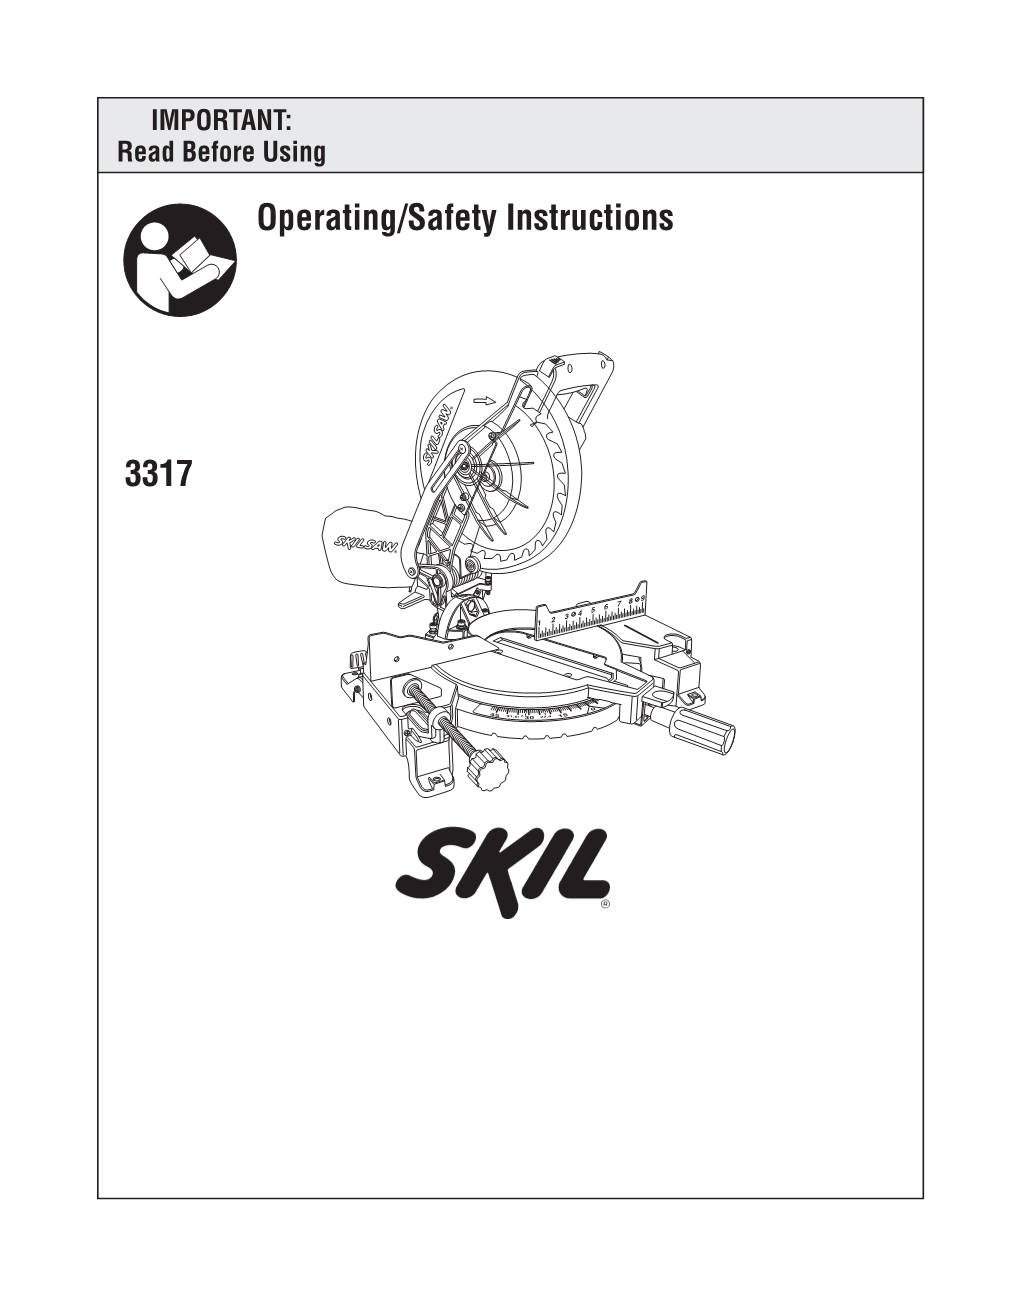 SKIL Power Tools Operating Instructions